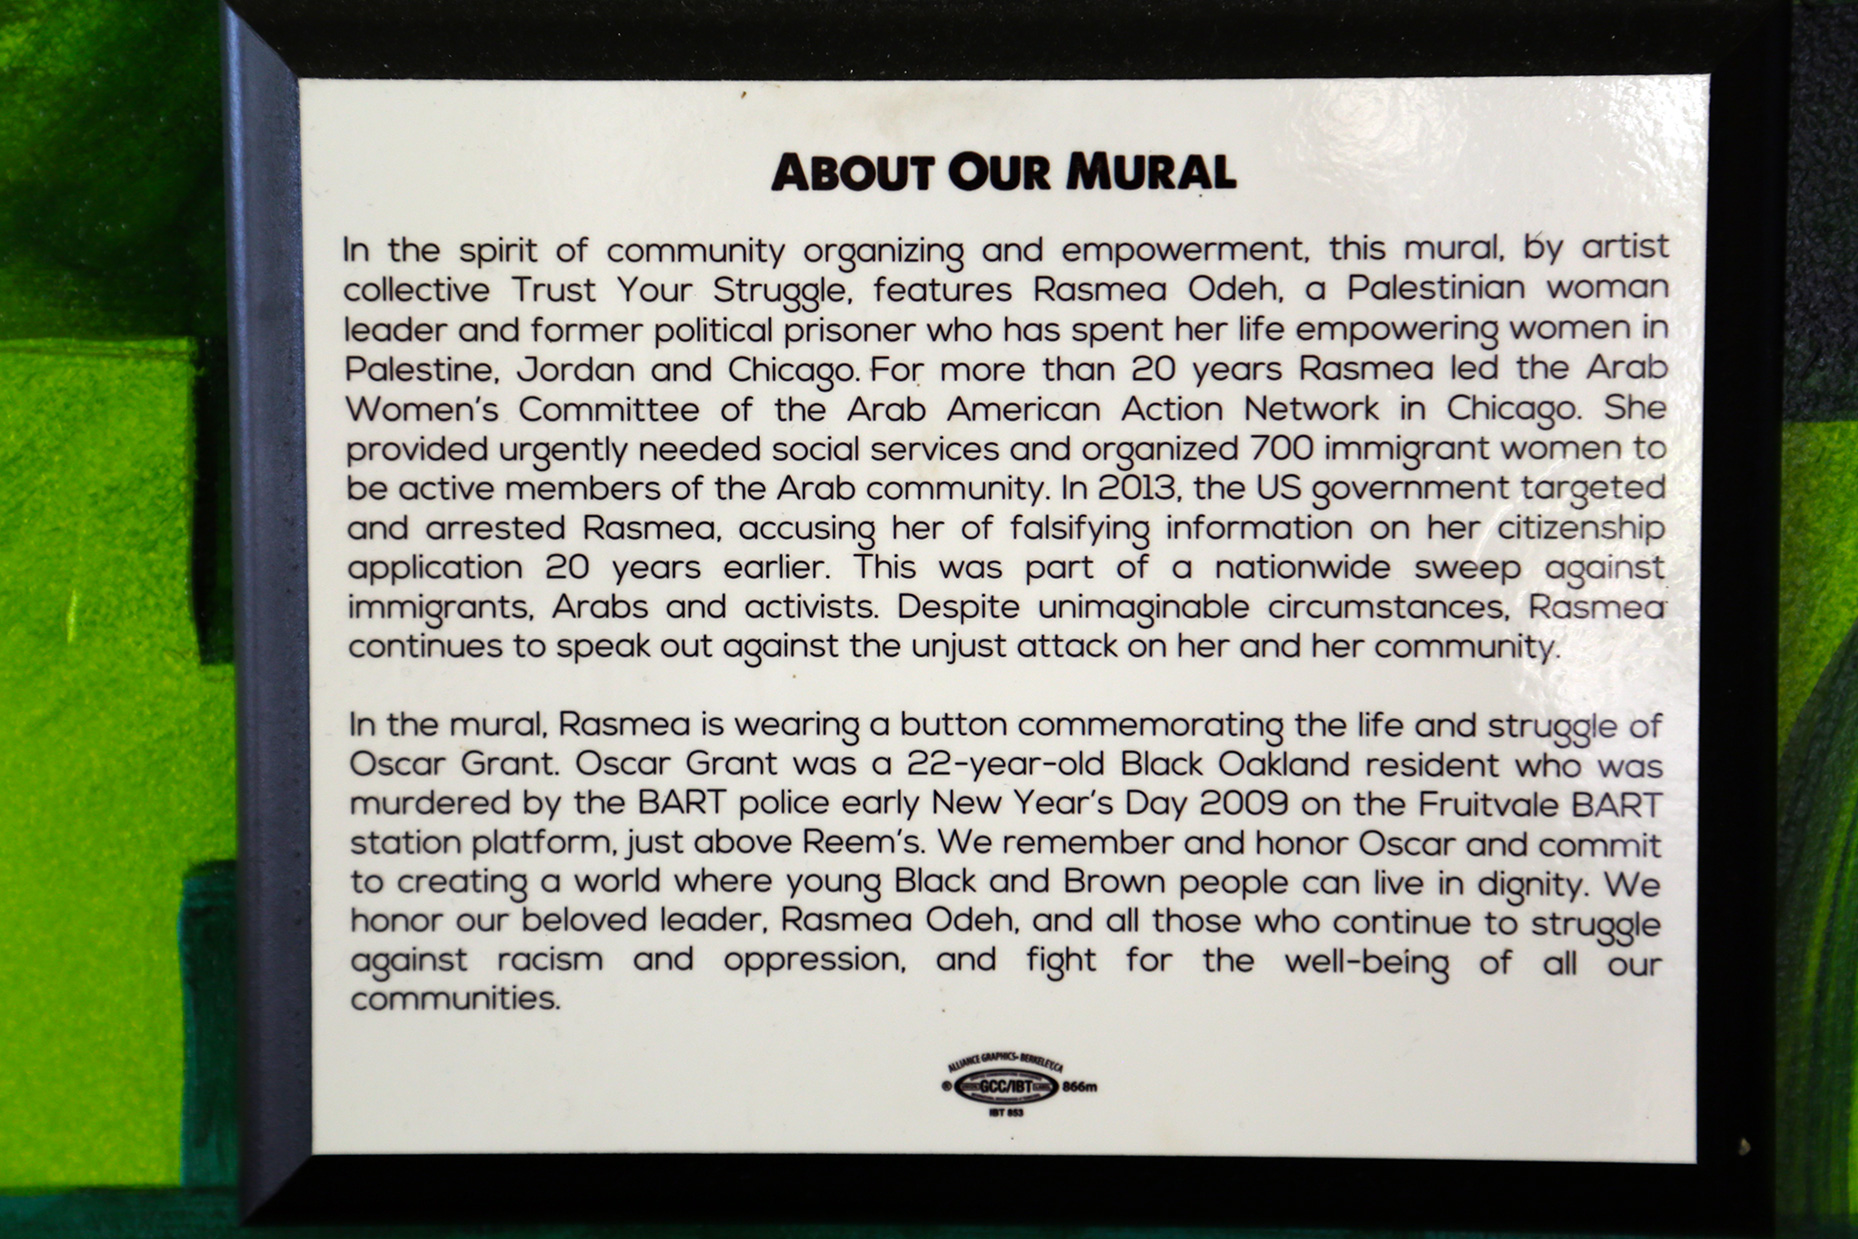 Statement about the mural.